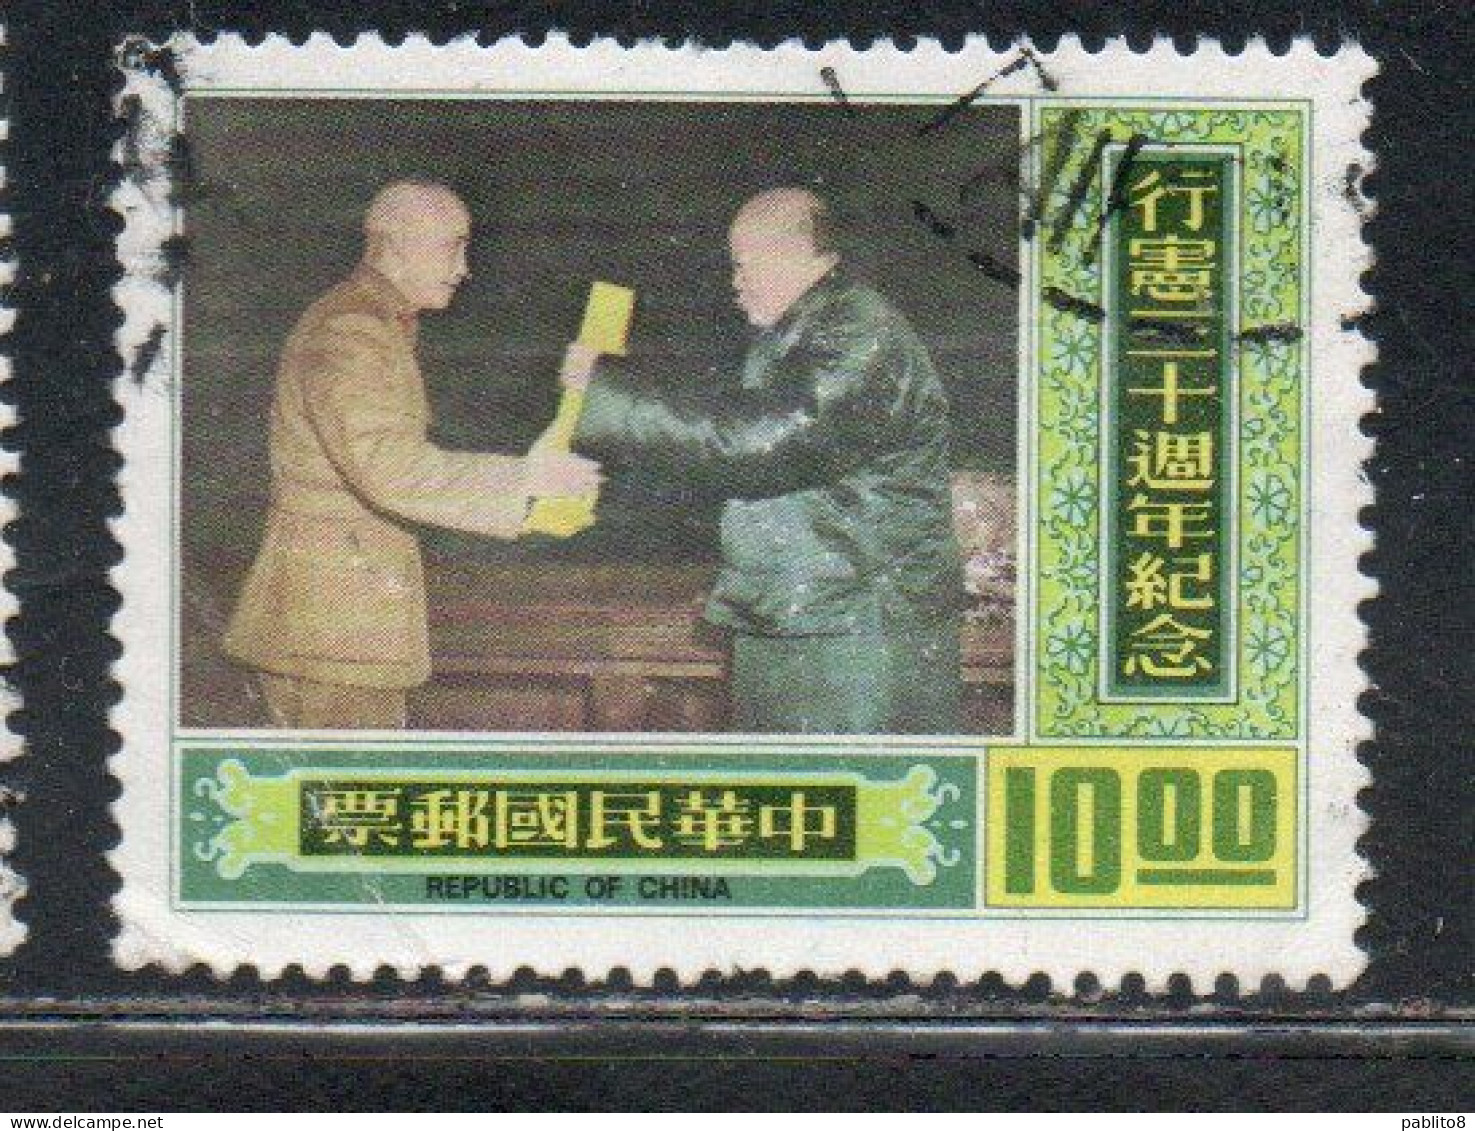 CHINA REPUBLIC CINA TAIWAN FORMOSA 1977 PRESIDENT CHIANG KAI-SHEK ACCEPTING CONSTITUTION 10$ USED USATO OBLITERE' - Oblitérés